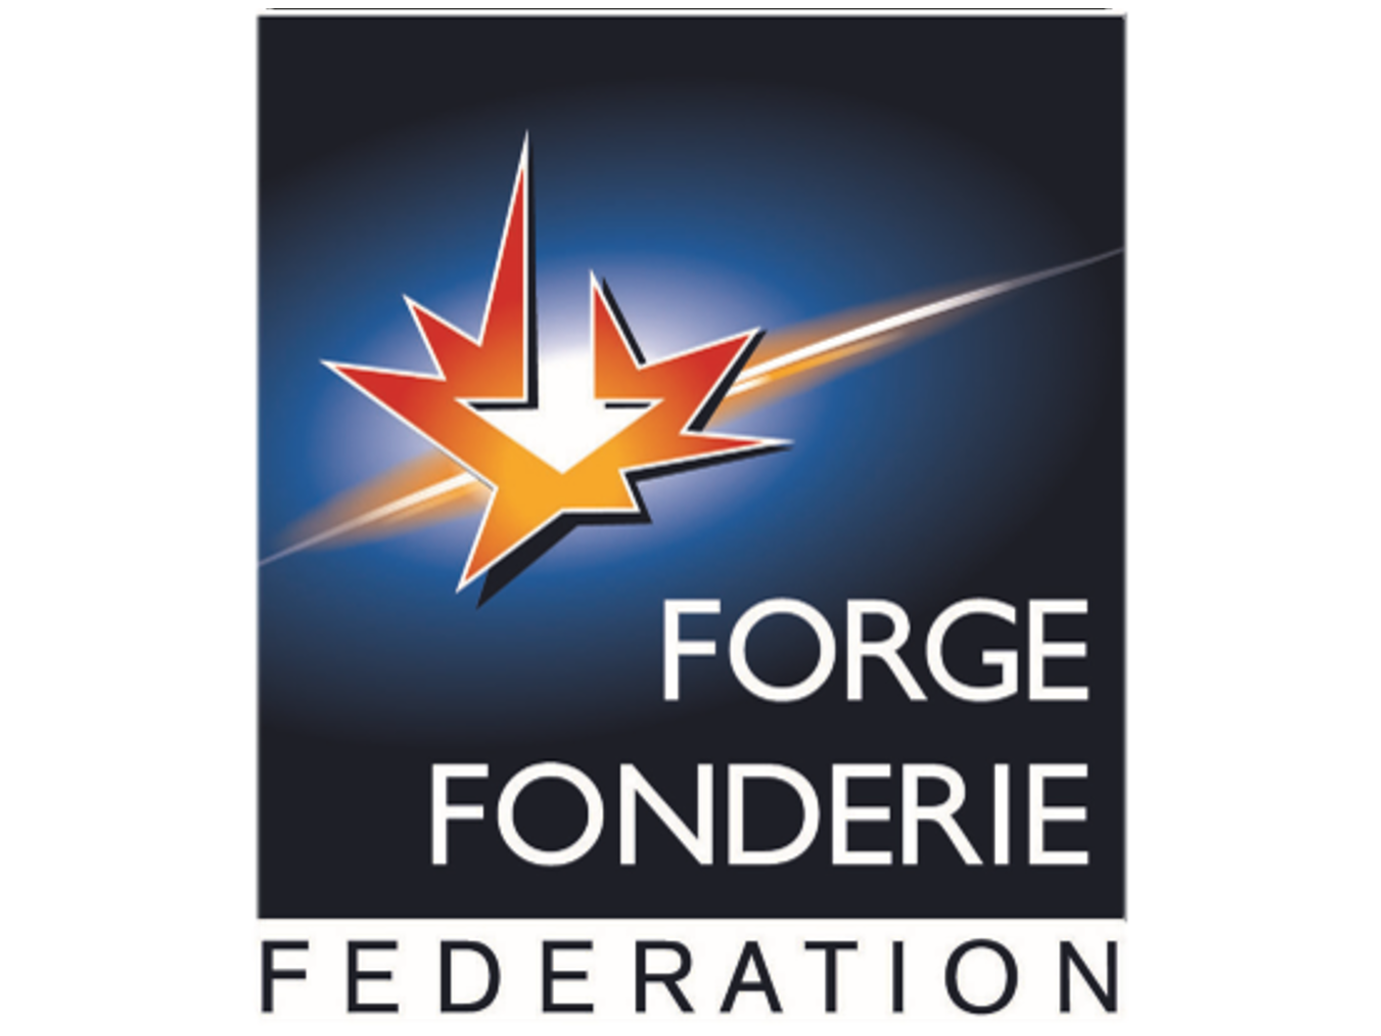 Forge fonderie